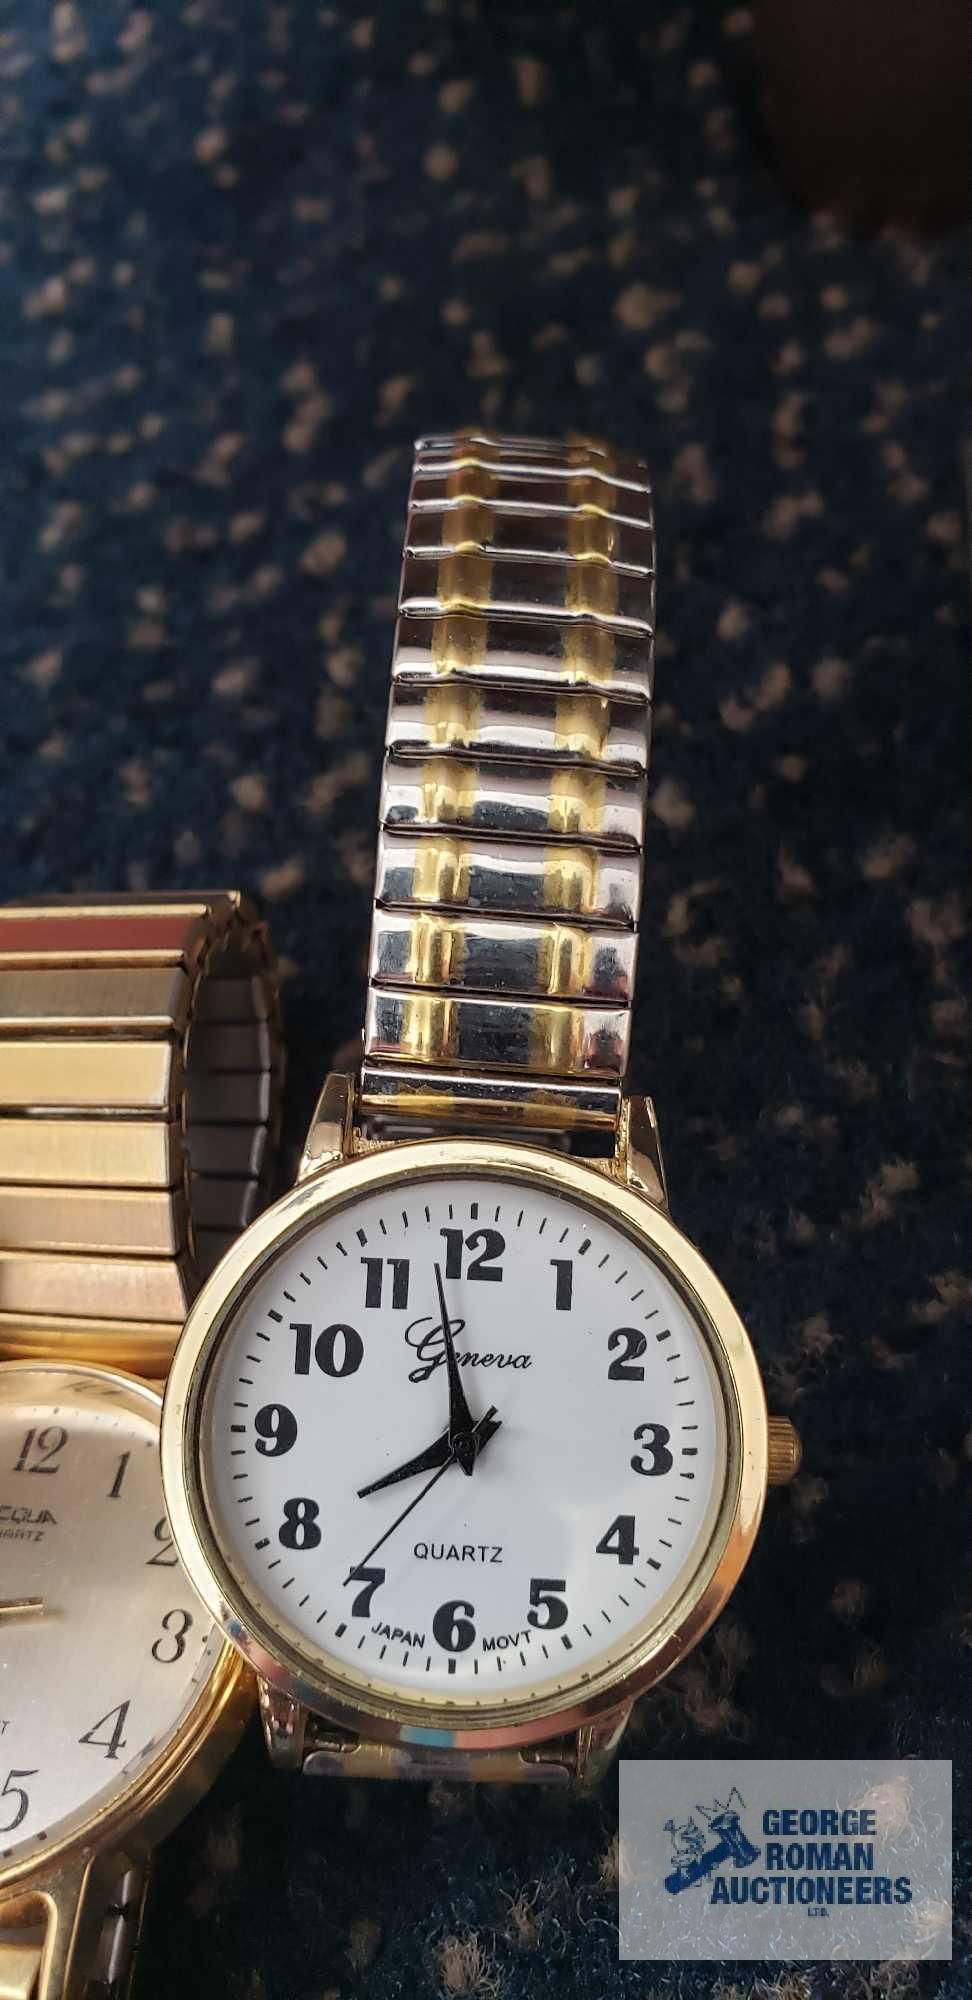 Assorted watches, watch...faces, and watch bands